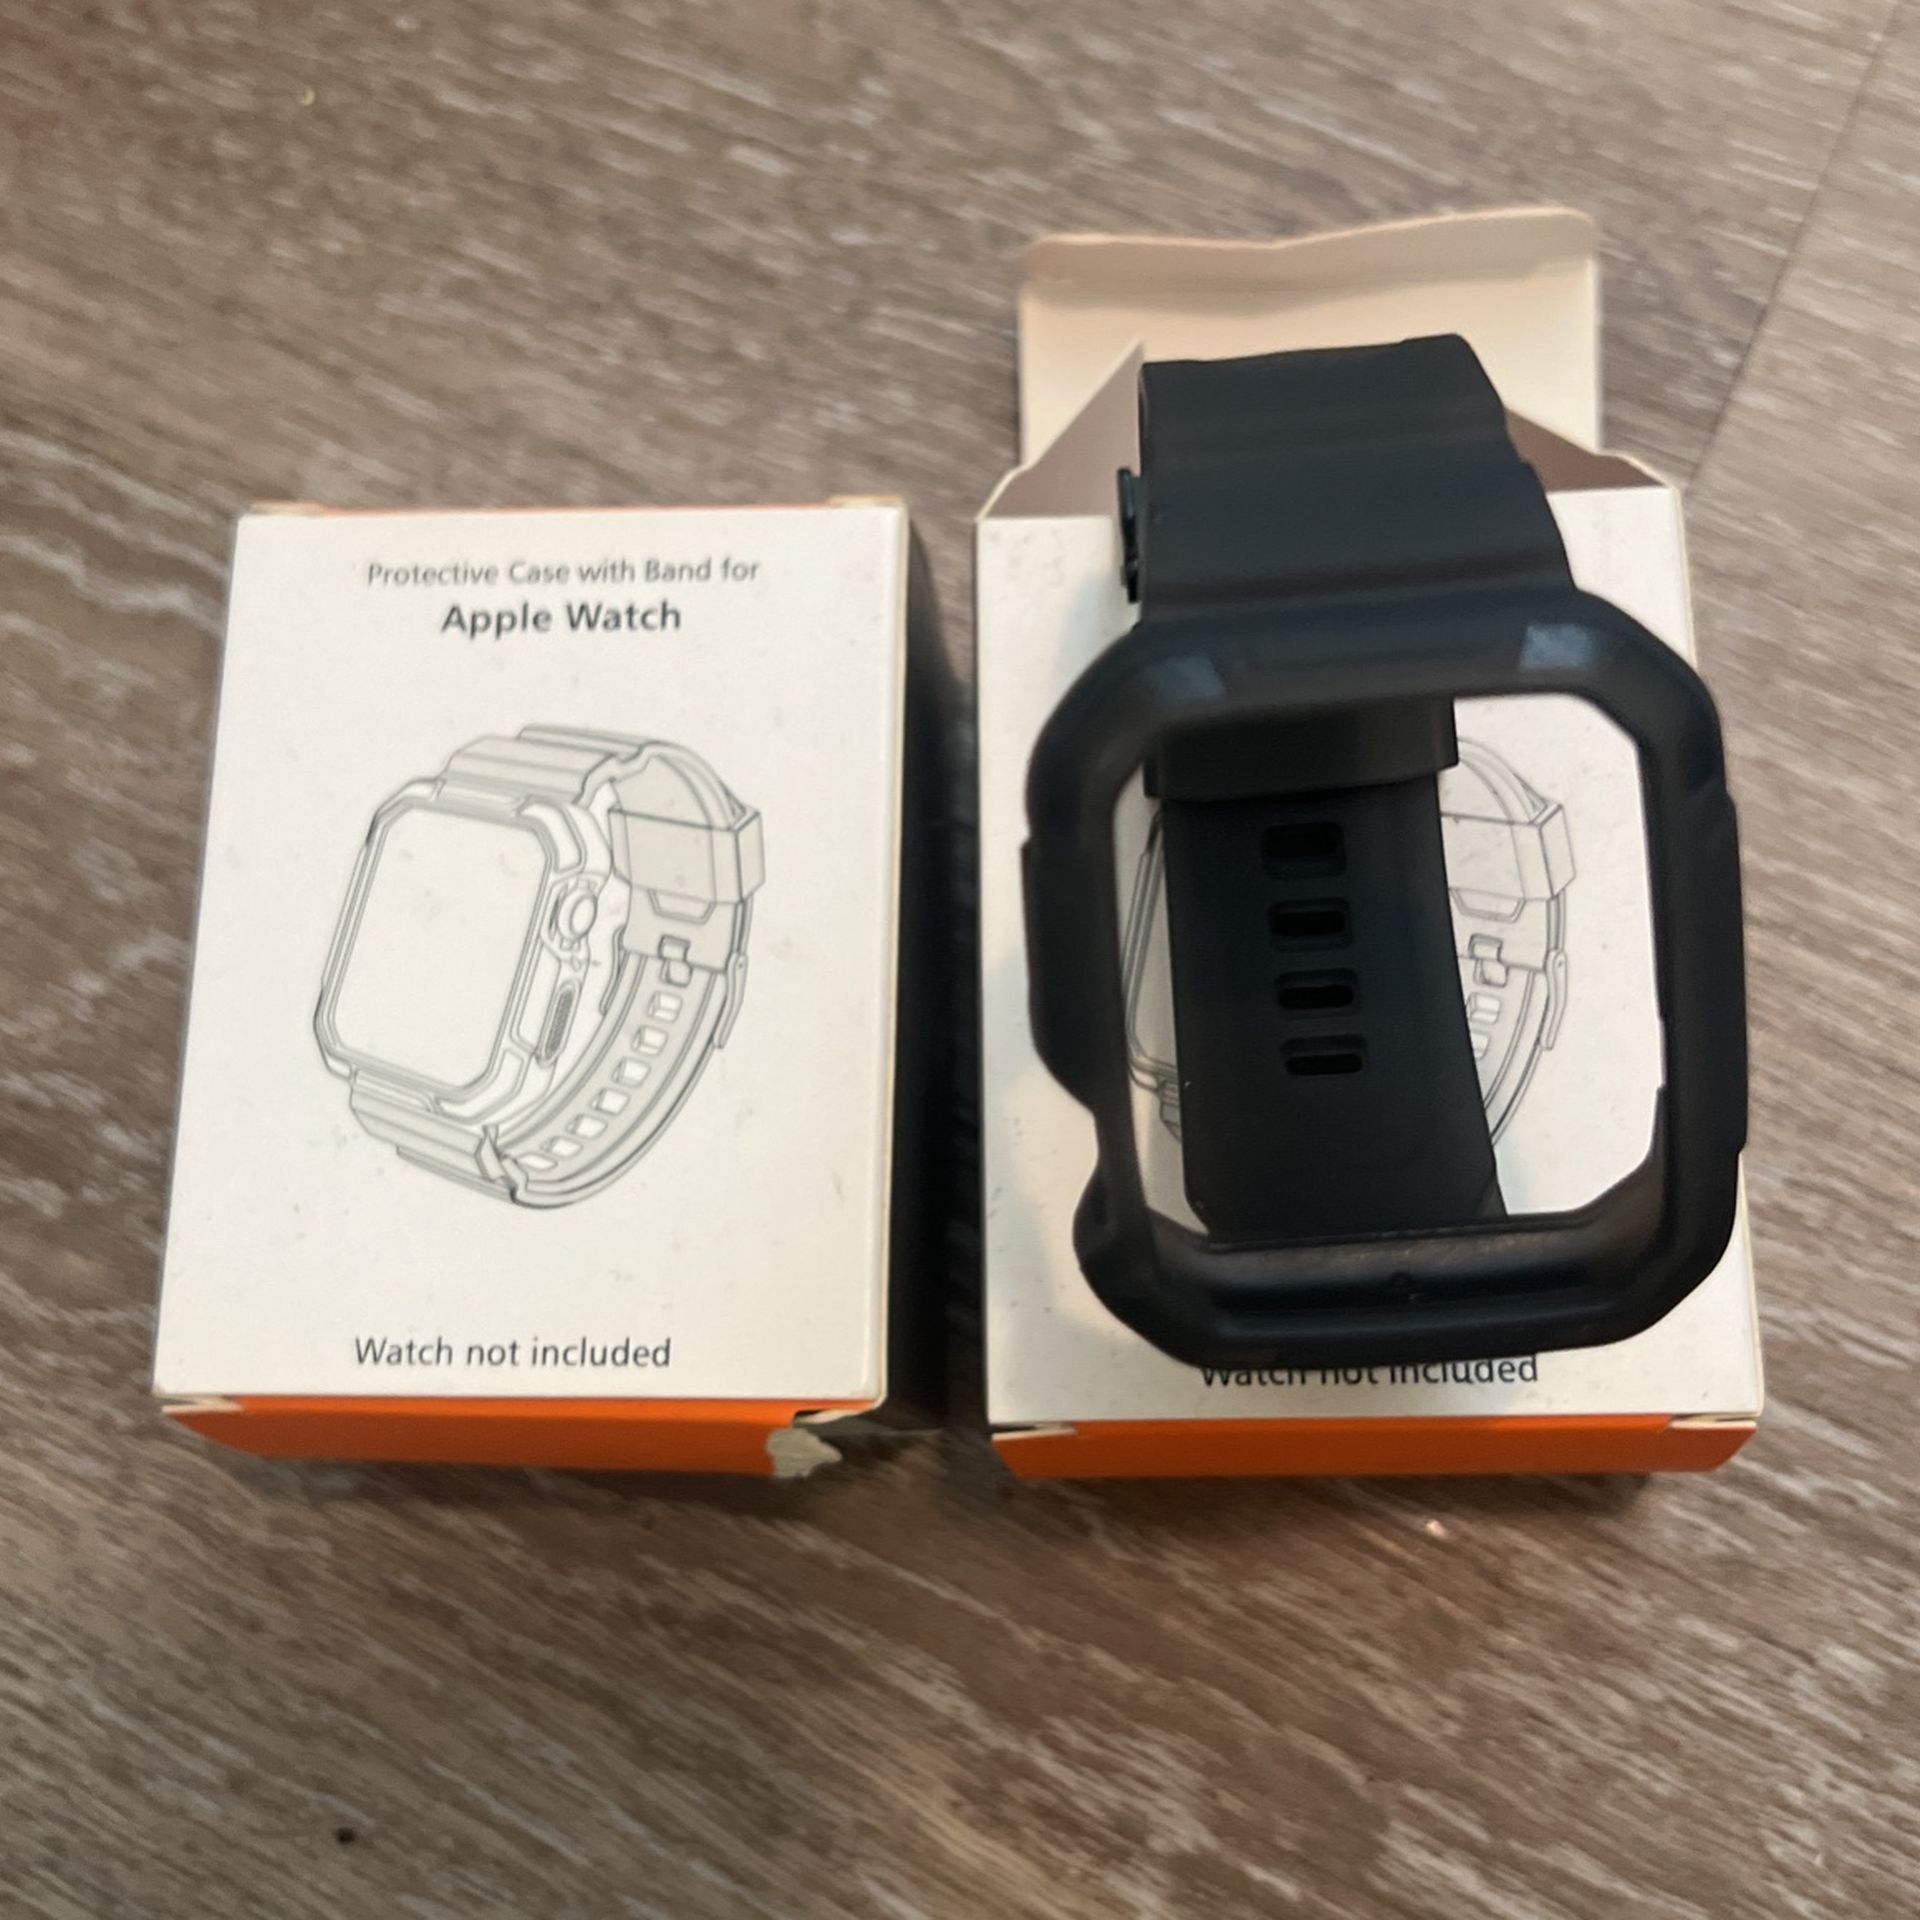 Apple Watch Protective Case With Band